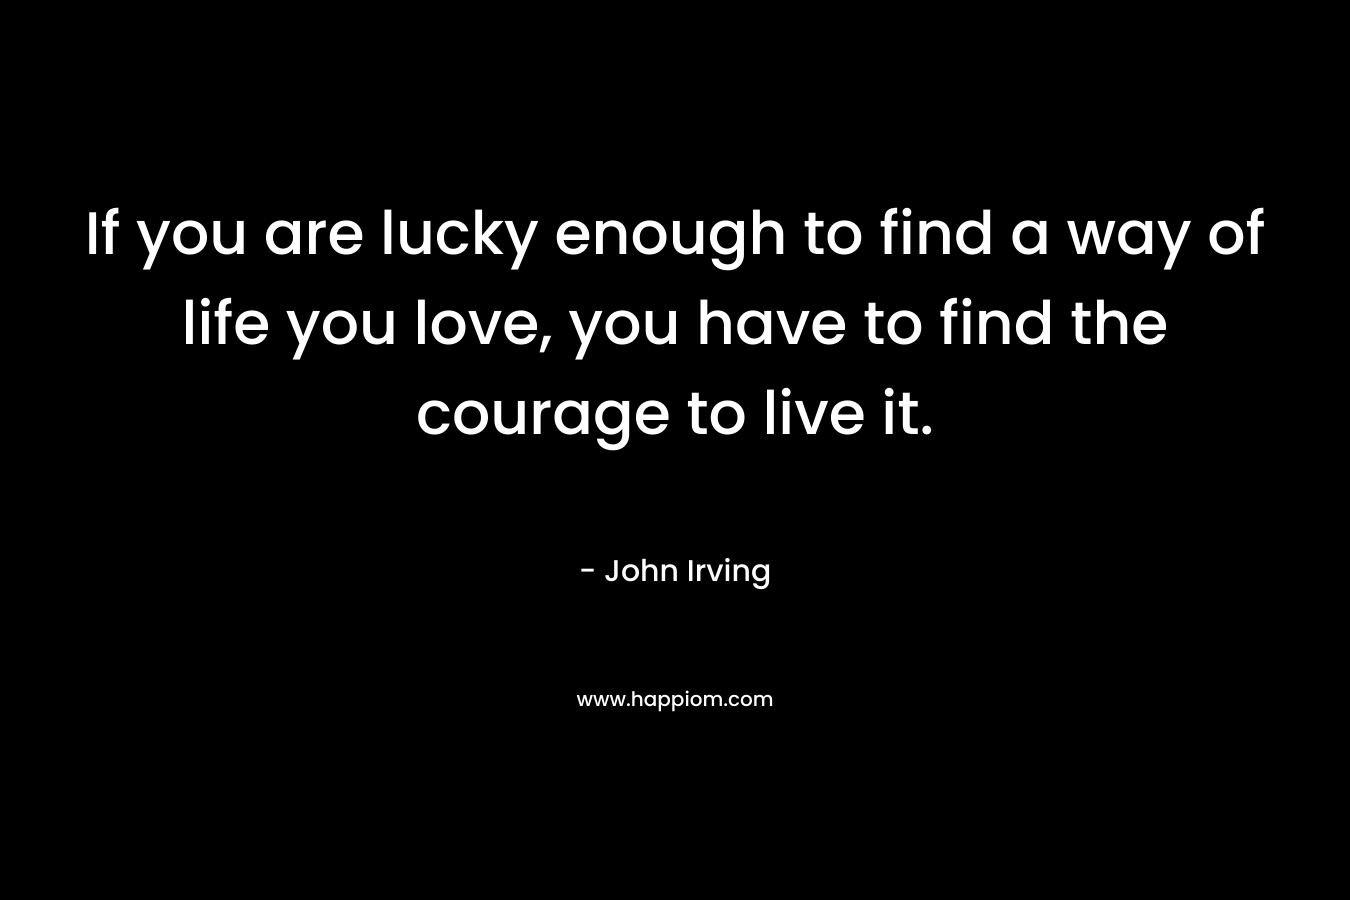 If you are lucky enough to find a way of life you love, you have to find the courage to live it.